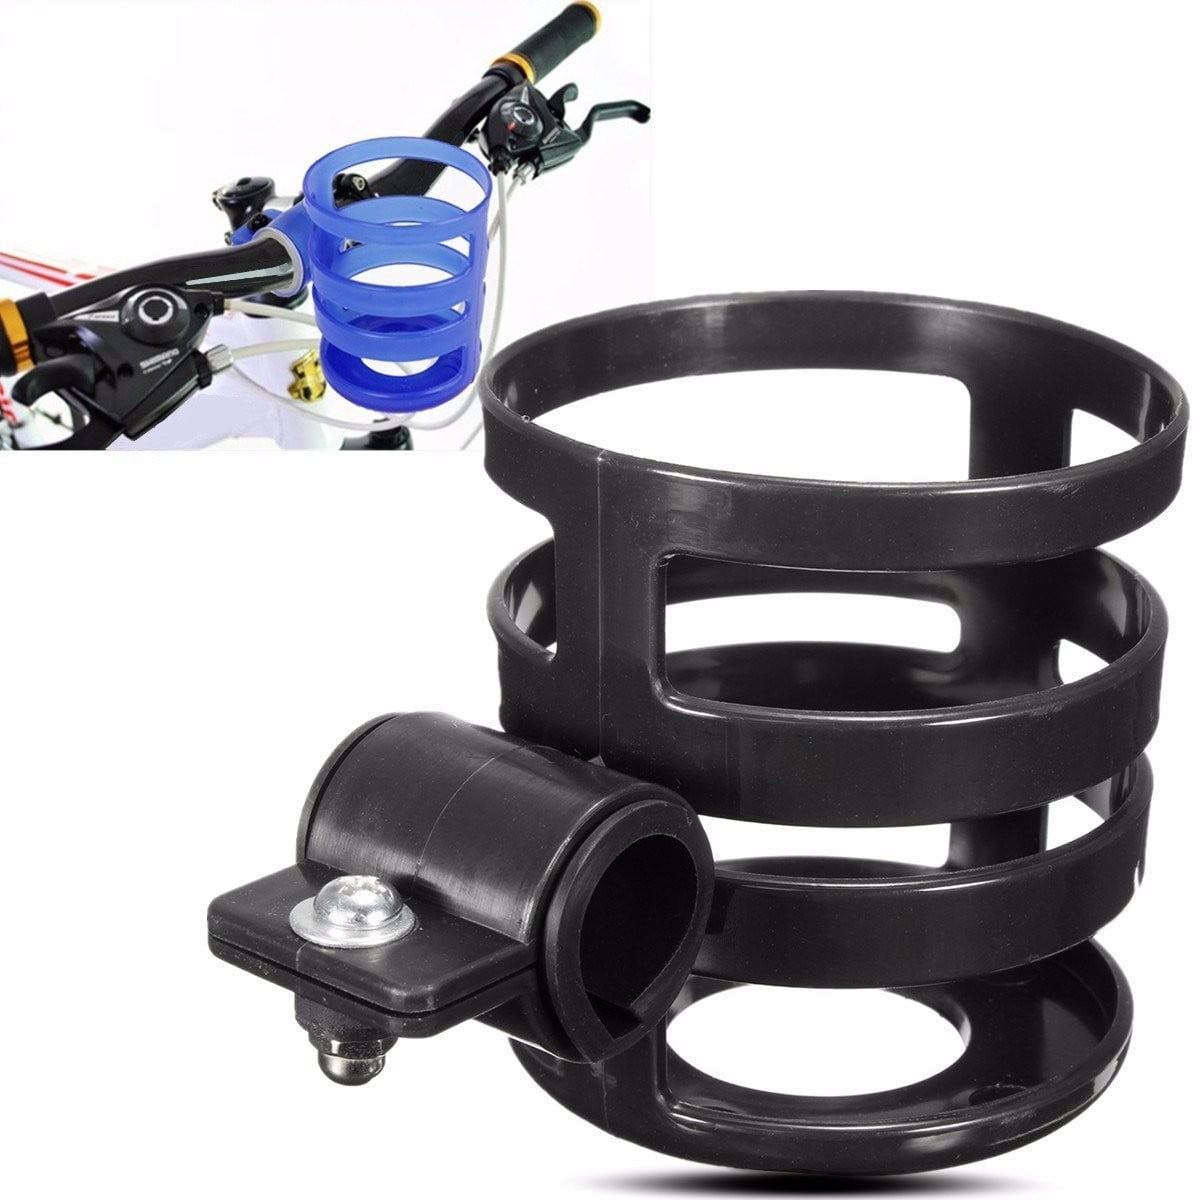 Details about   Bicycle Water Bottle Cage Drink Cup Holder Rack Mountain Bike Cycling MTB Parts.